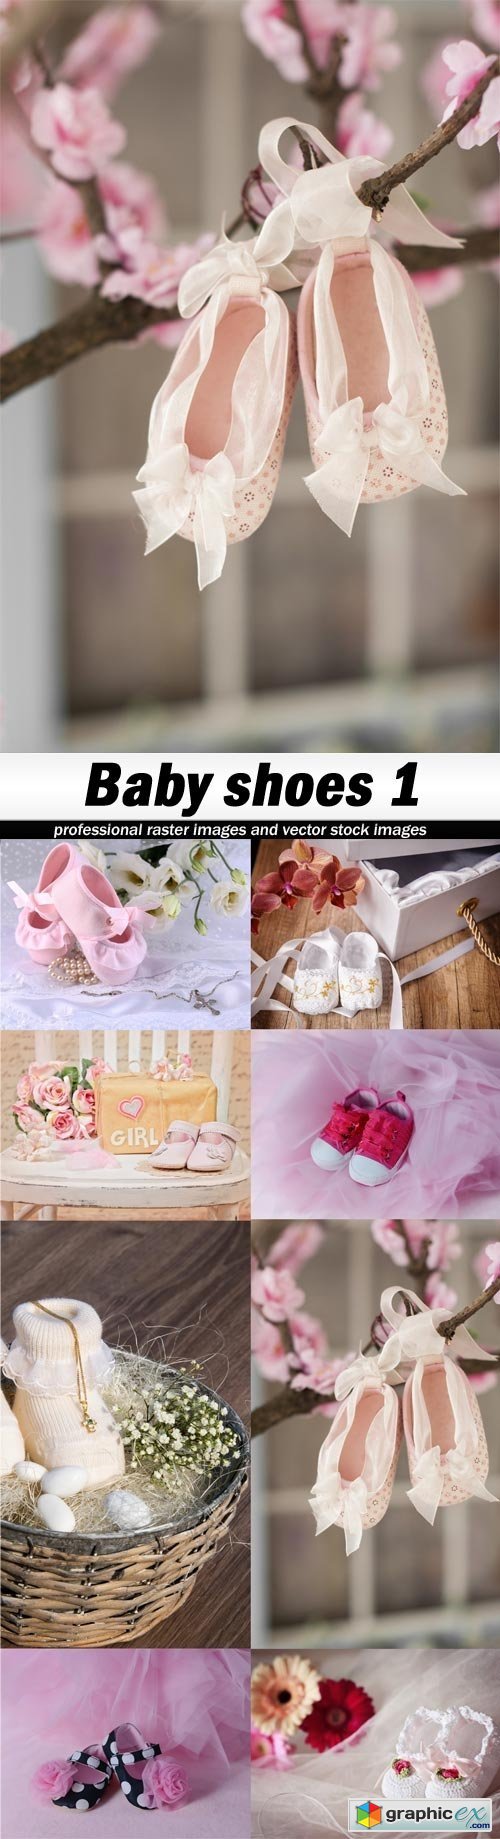 Baby shoes 1-8xJPEGs